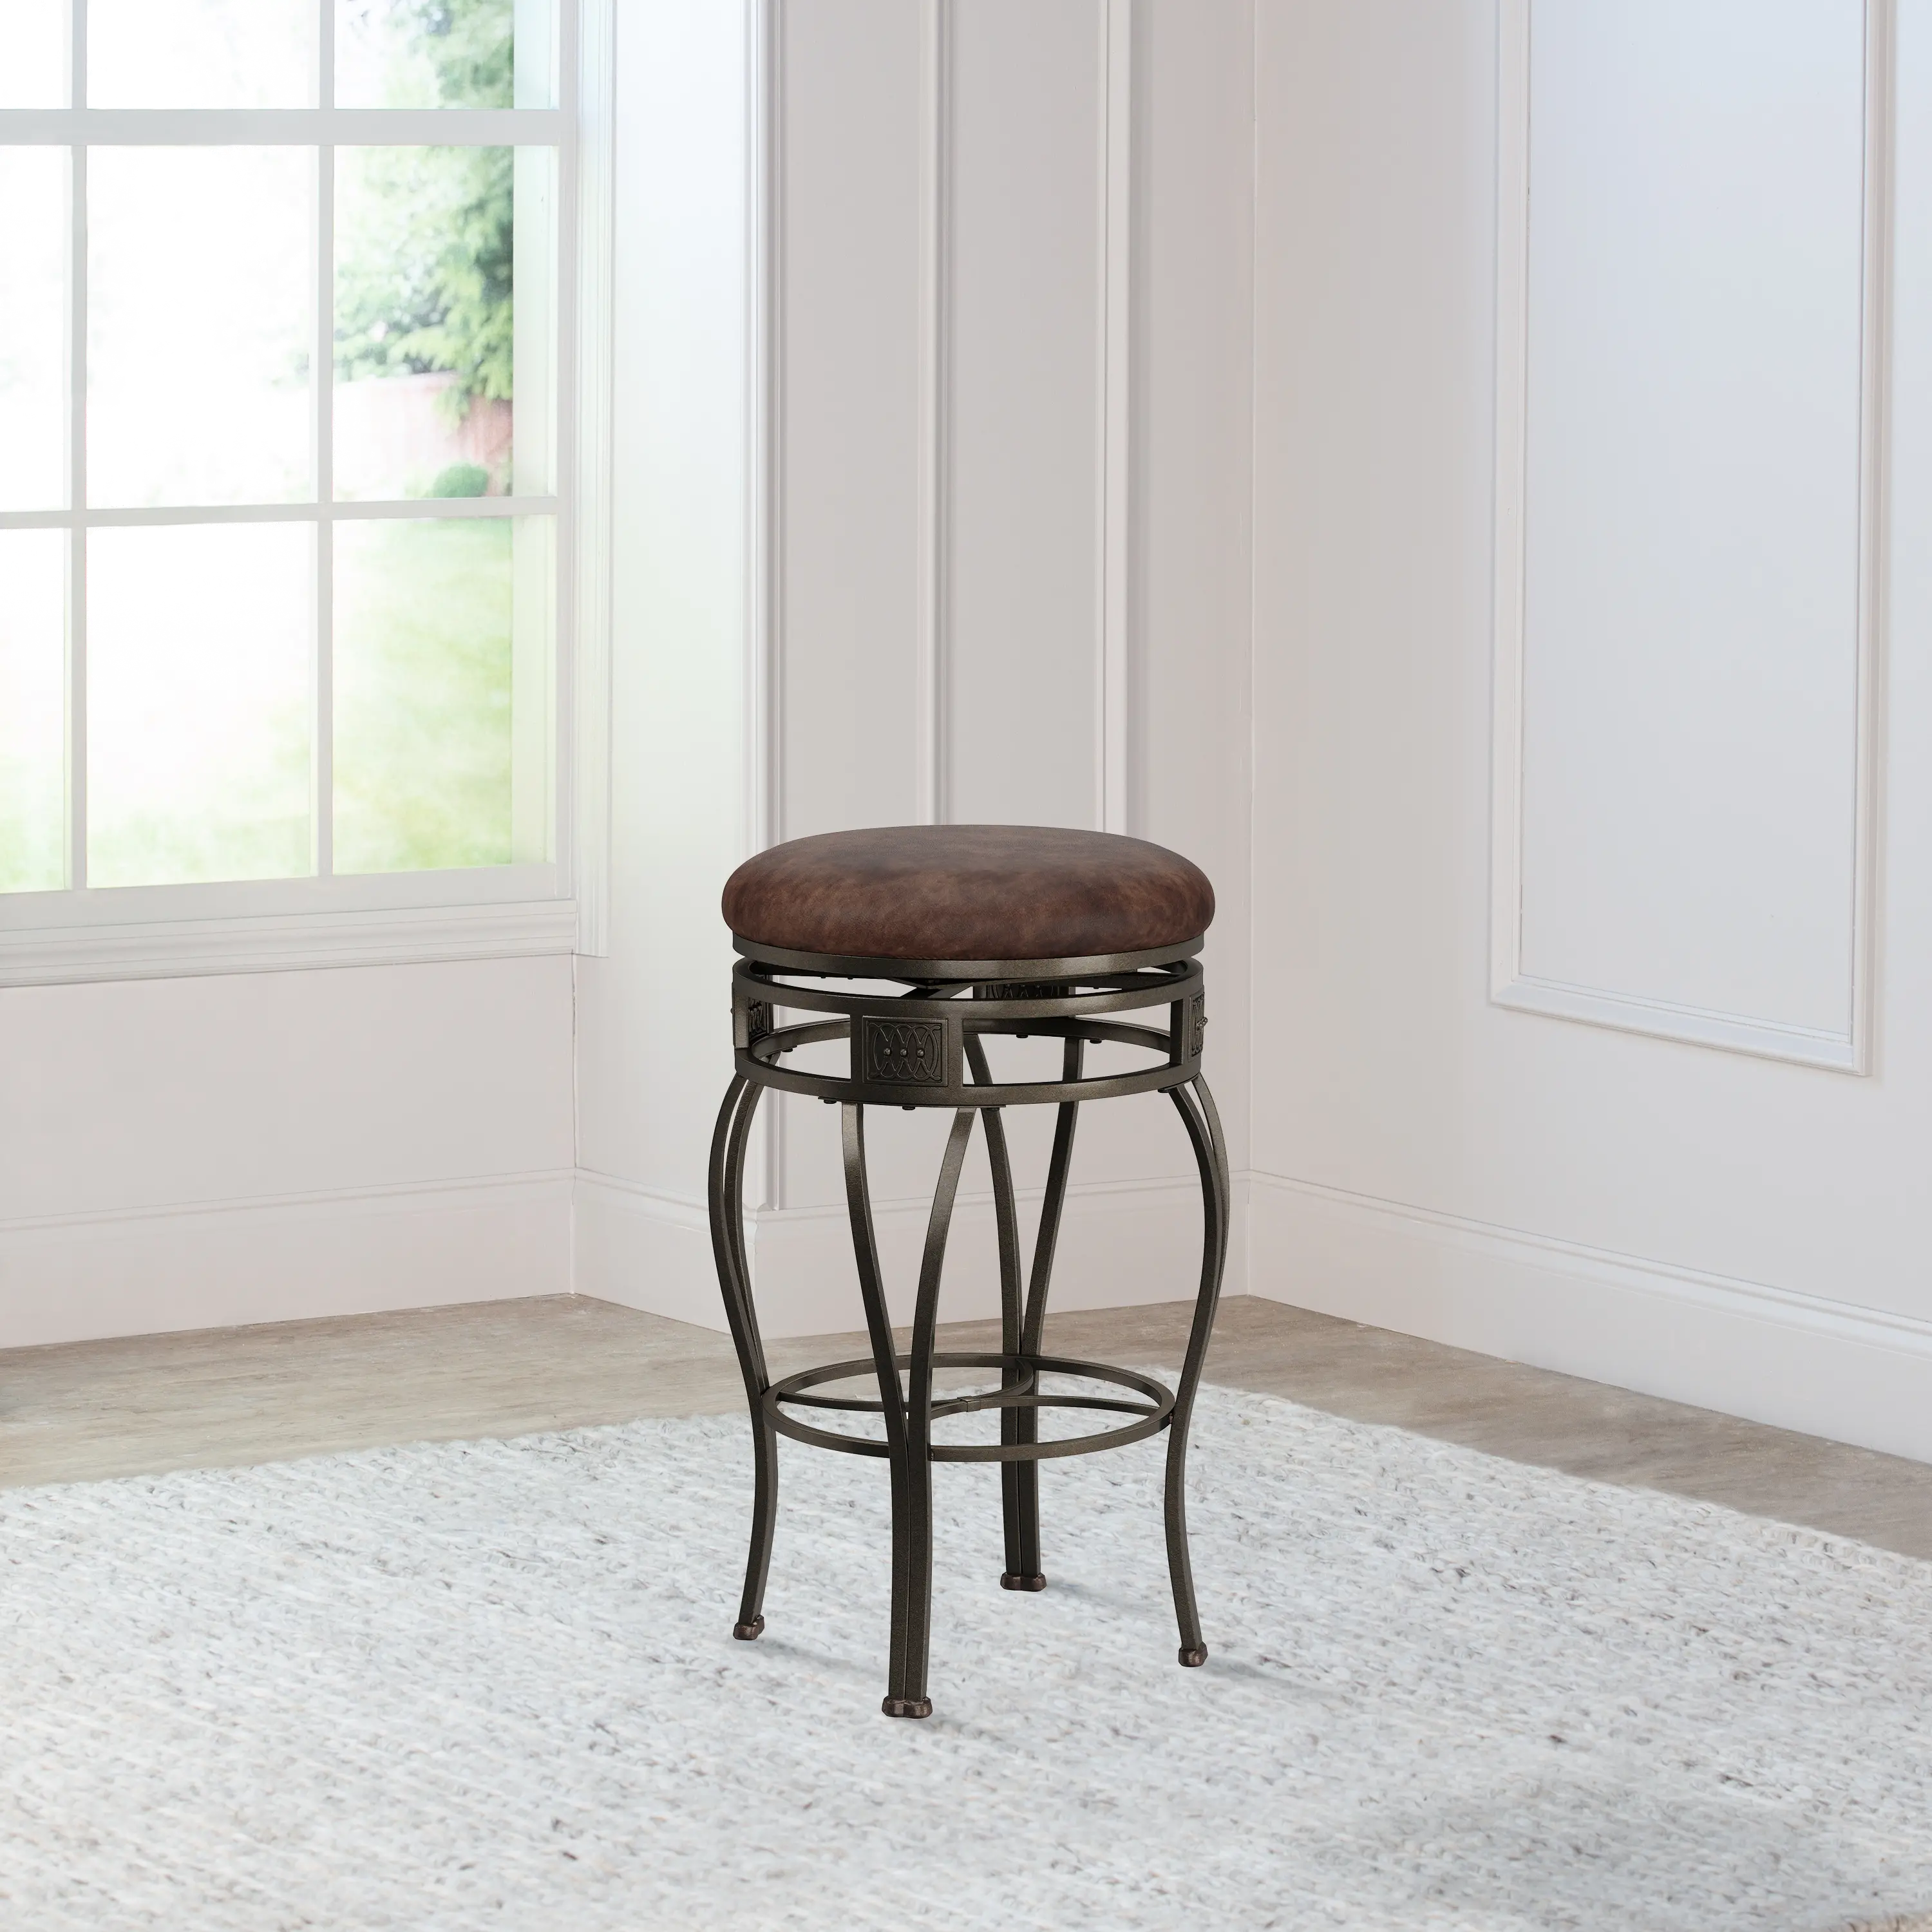 Montello Traditional Old Steel Backless Swivel Bar Height Stool...